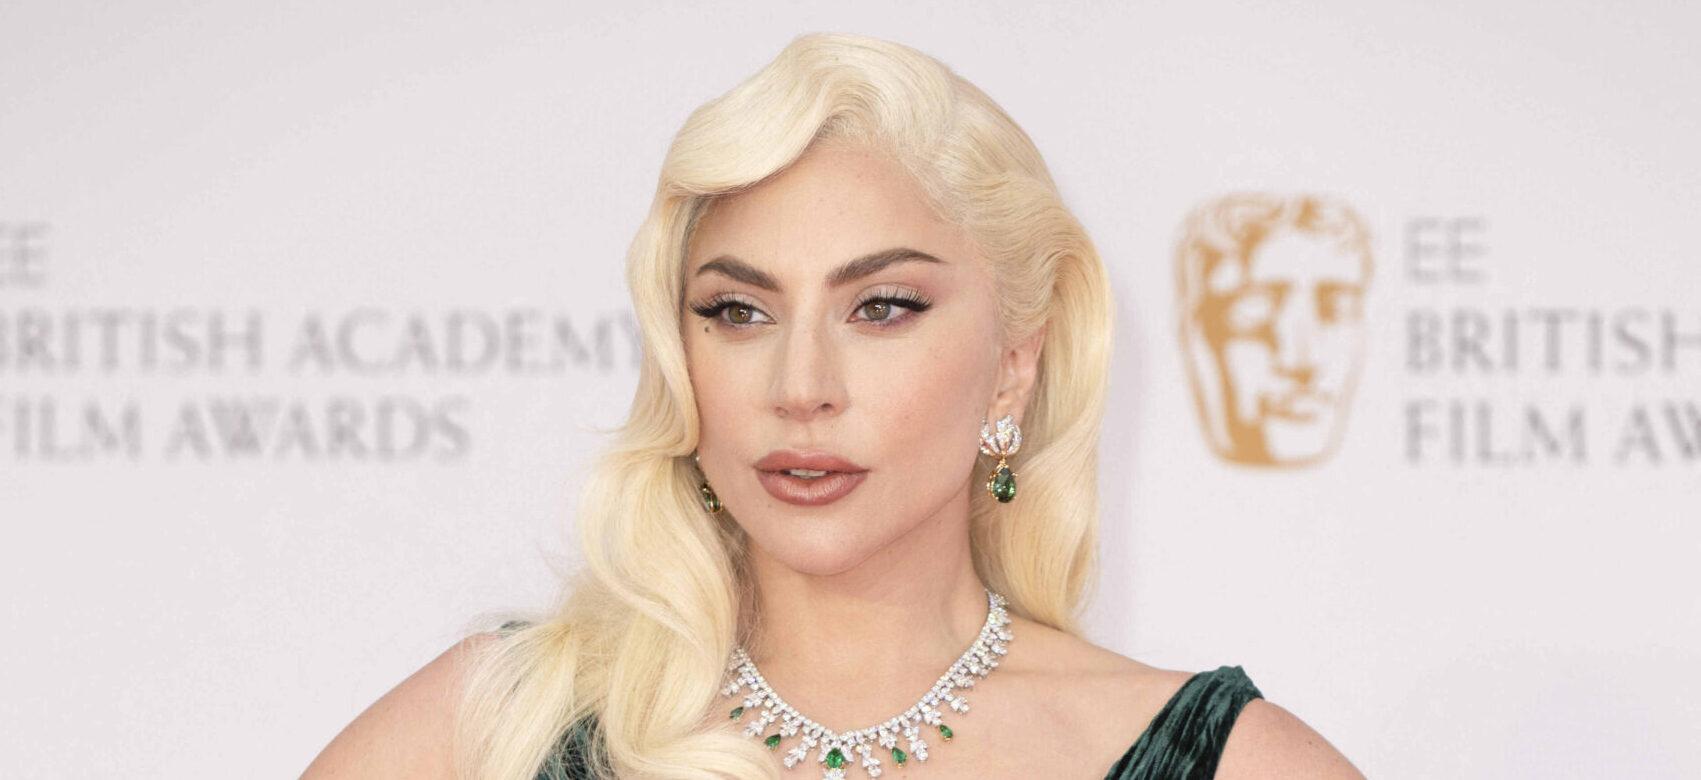 Lady Gaga Announces Massive Deal To Be Involved In Fortnite Festival